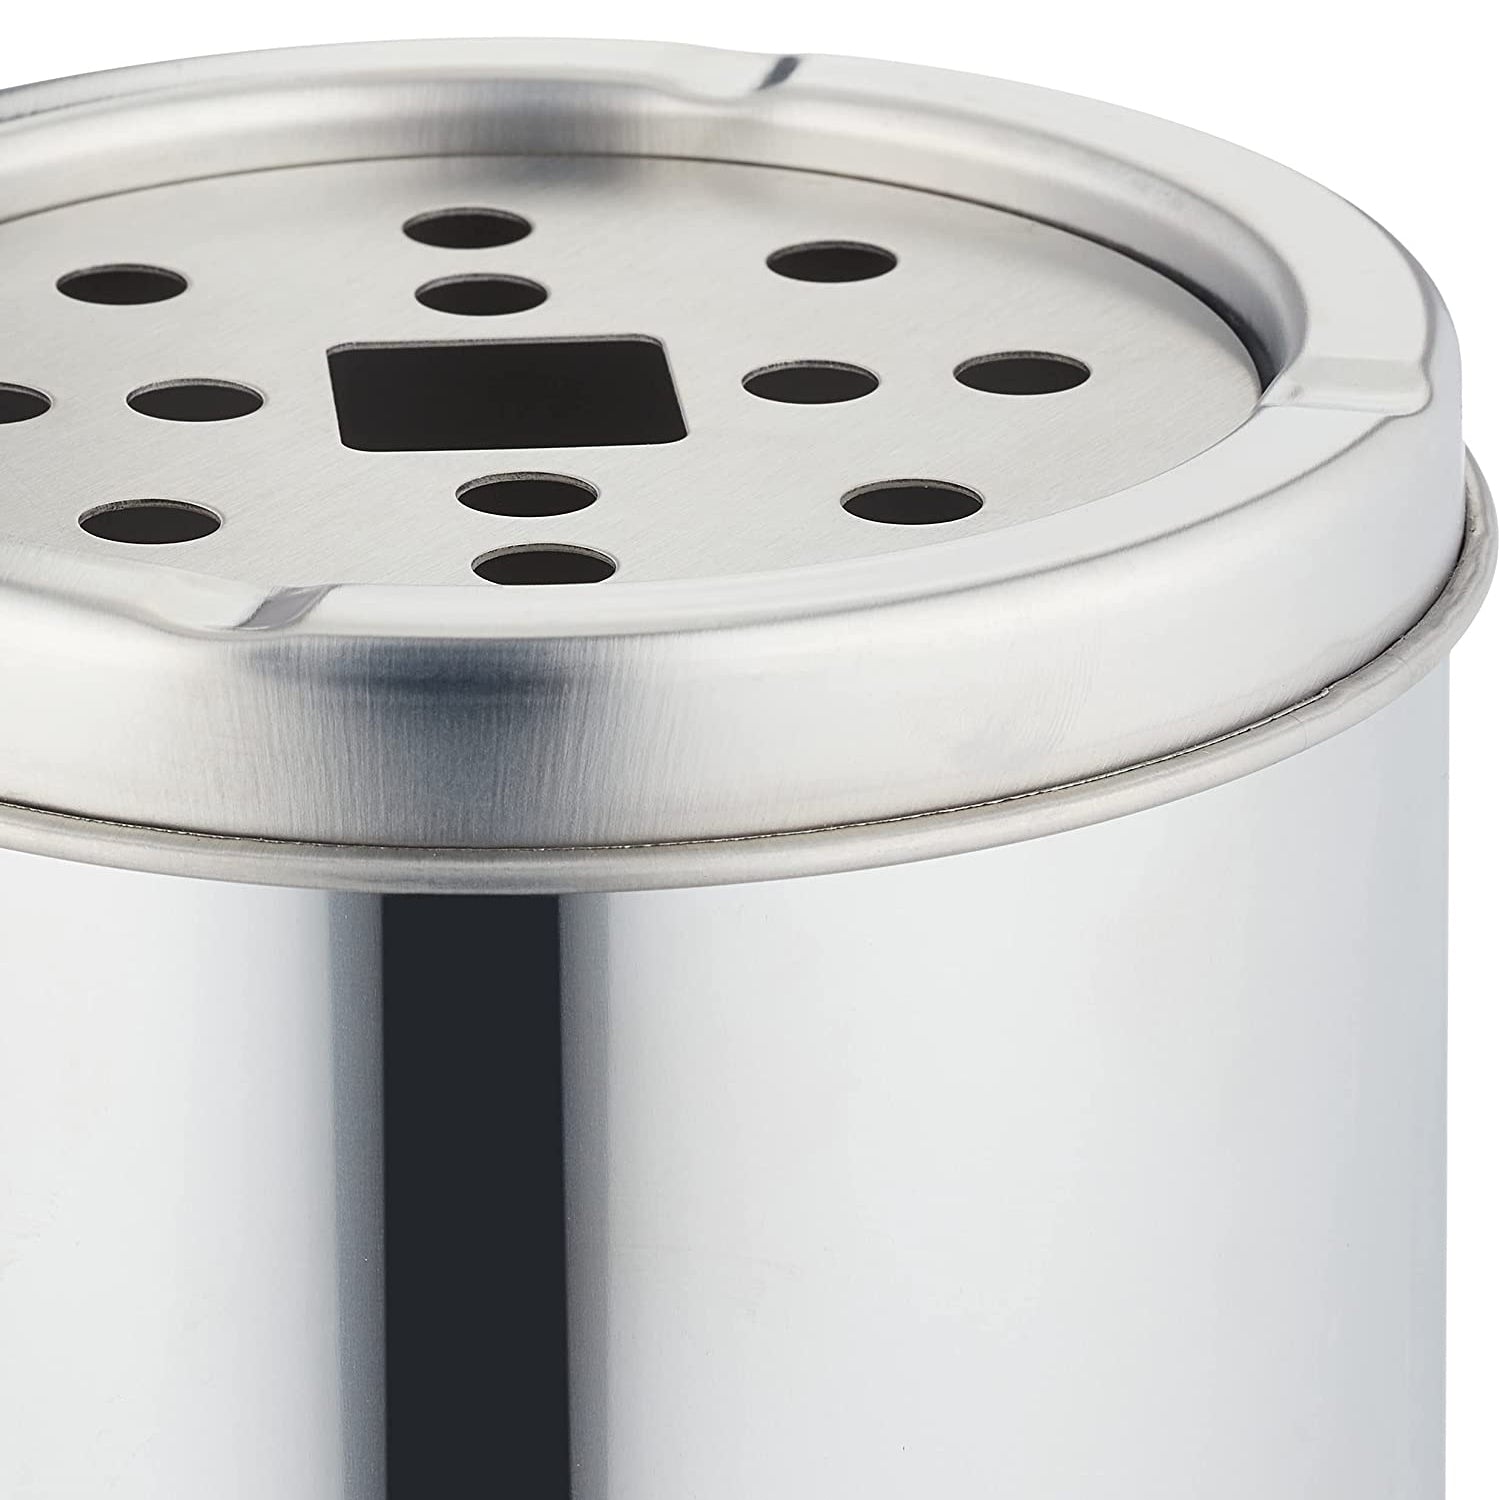 GEEZY Garden Stainless Steel Bin with Ashtray